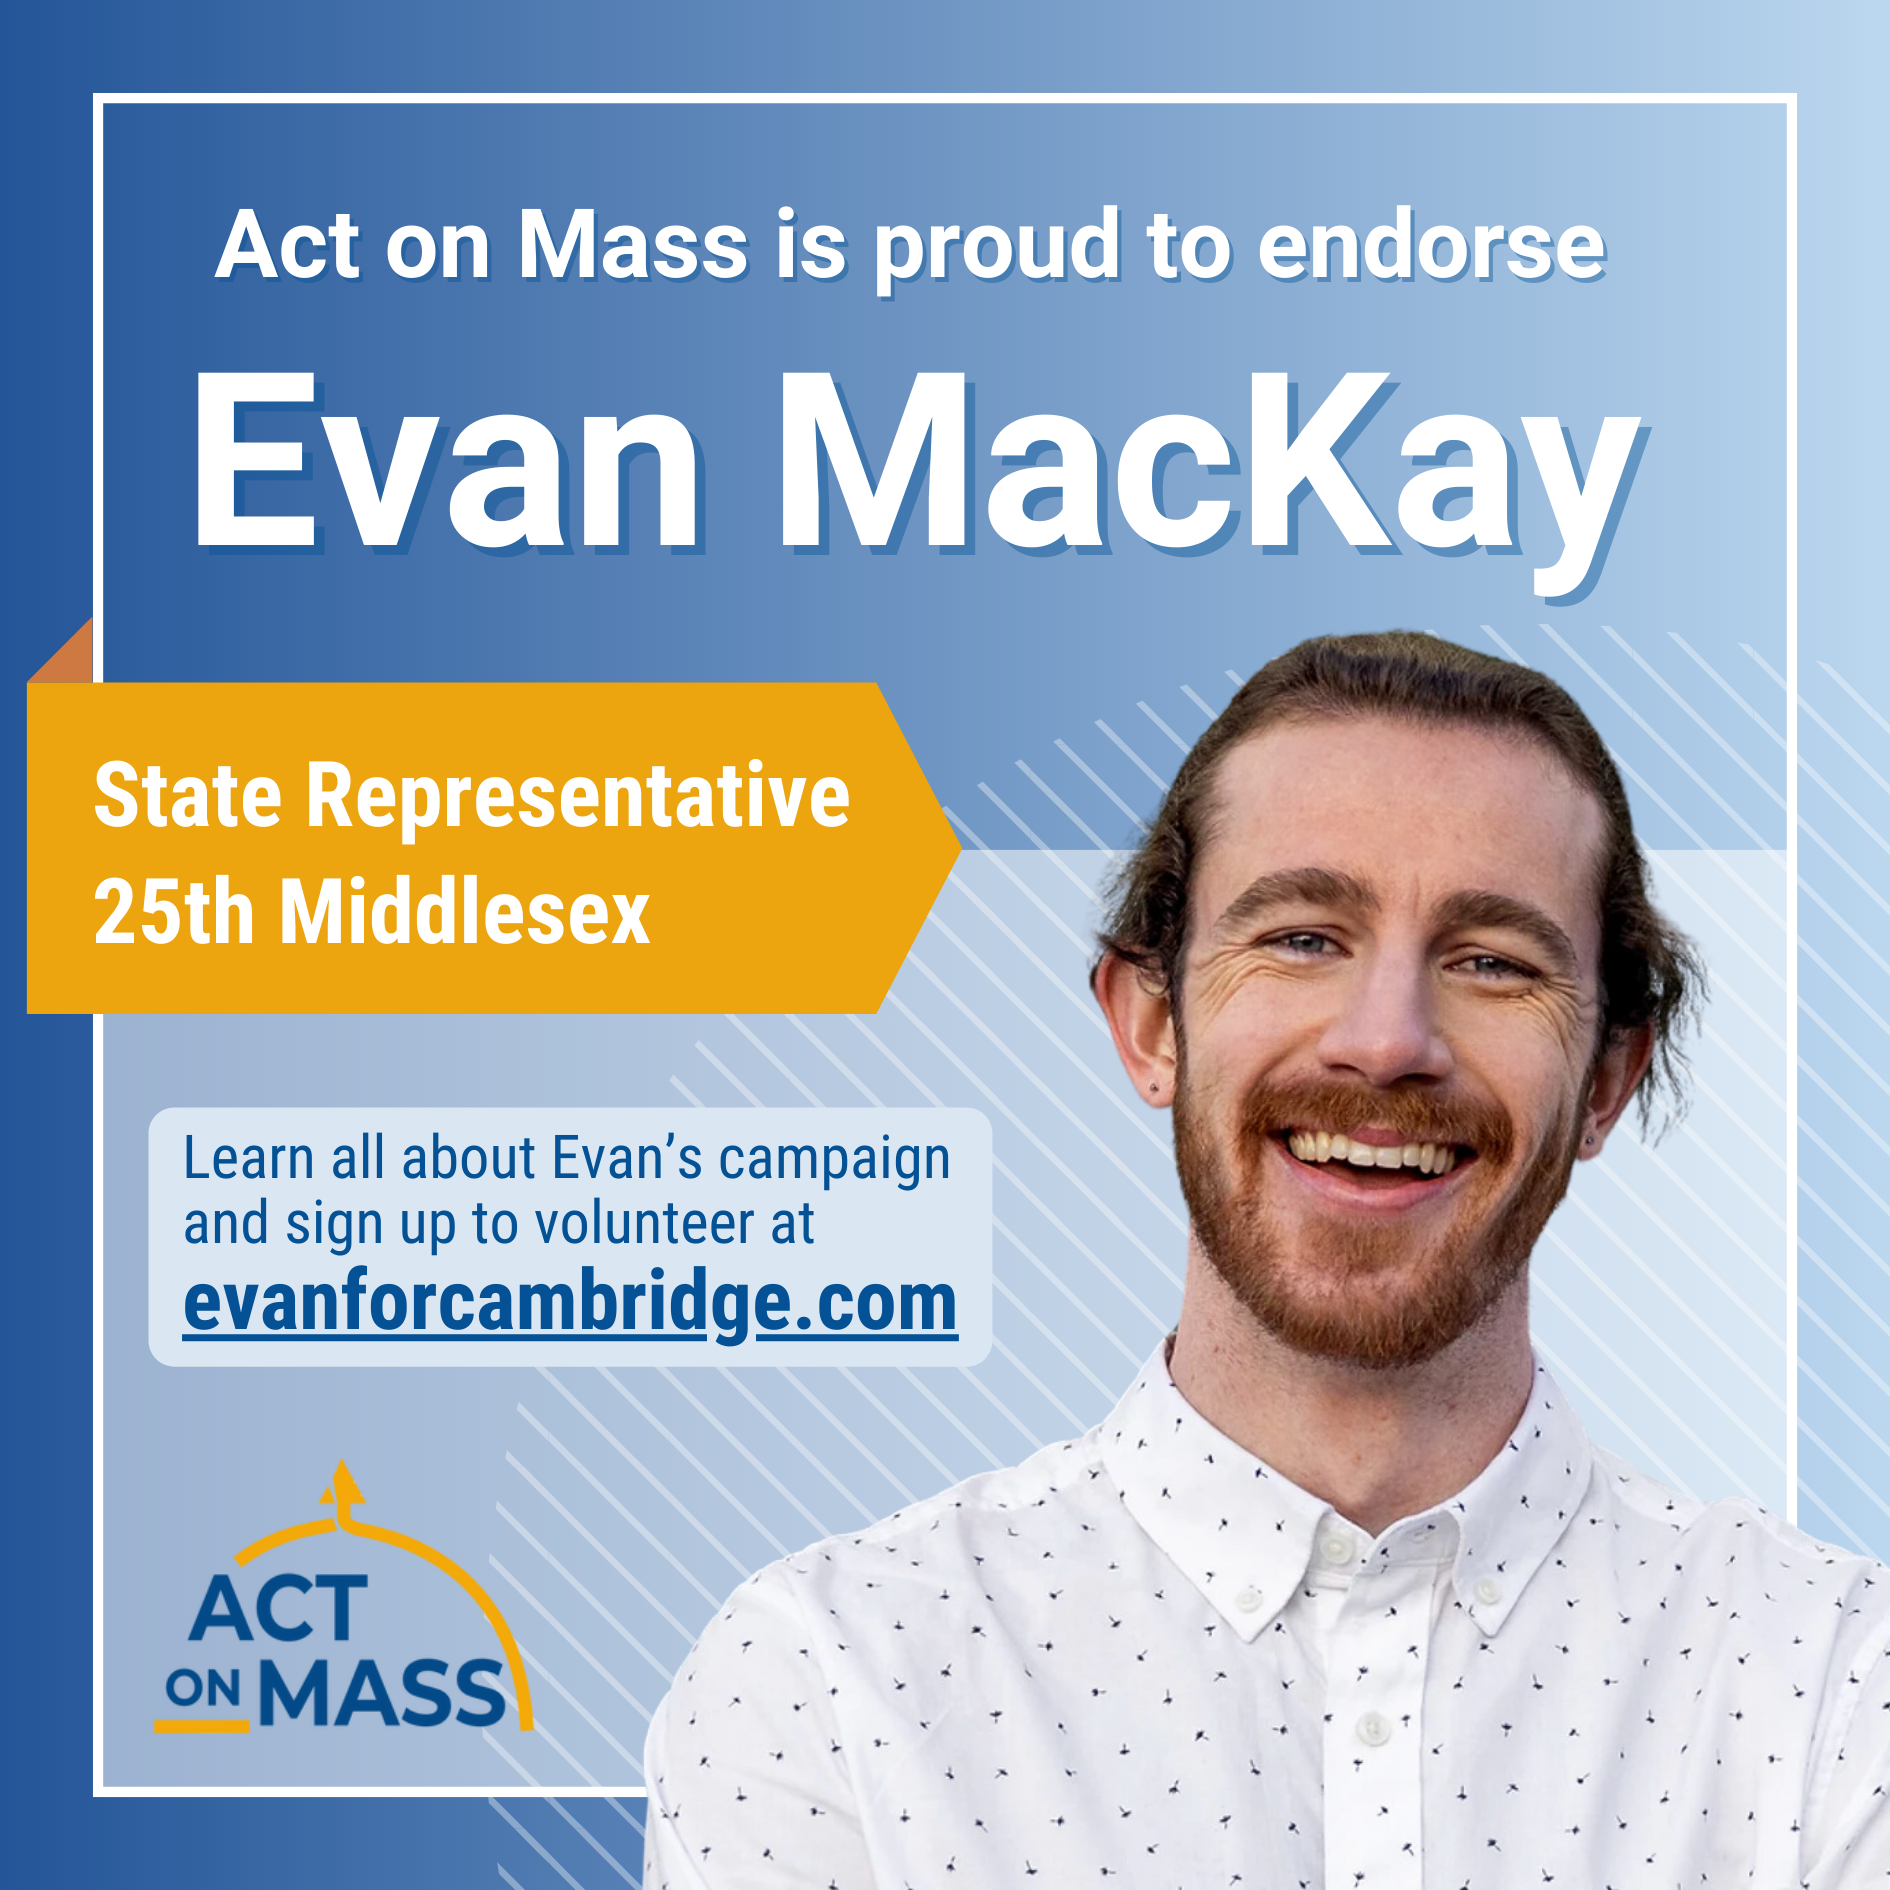 Headshot of Evan MacKay with text: "Act on Mass proudly endorses Evan MacKay - State Representative, 25th Middlesex"